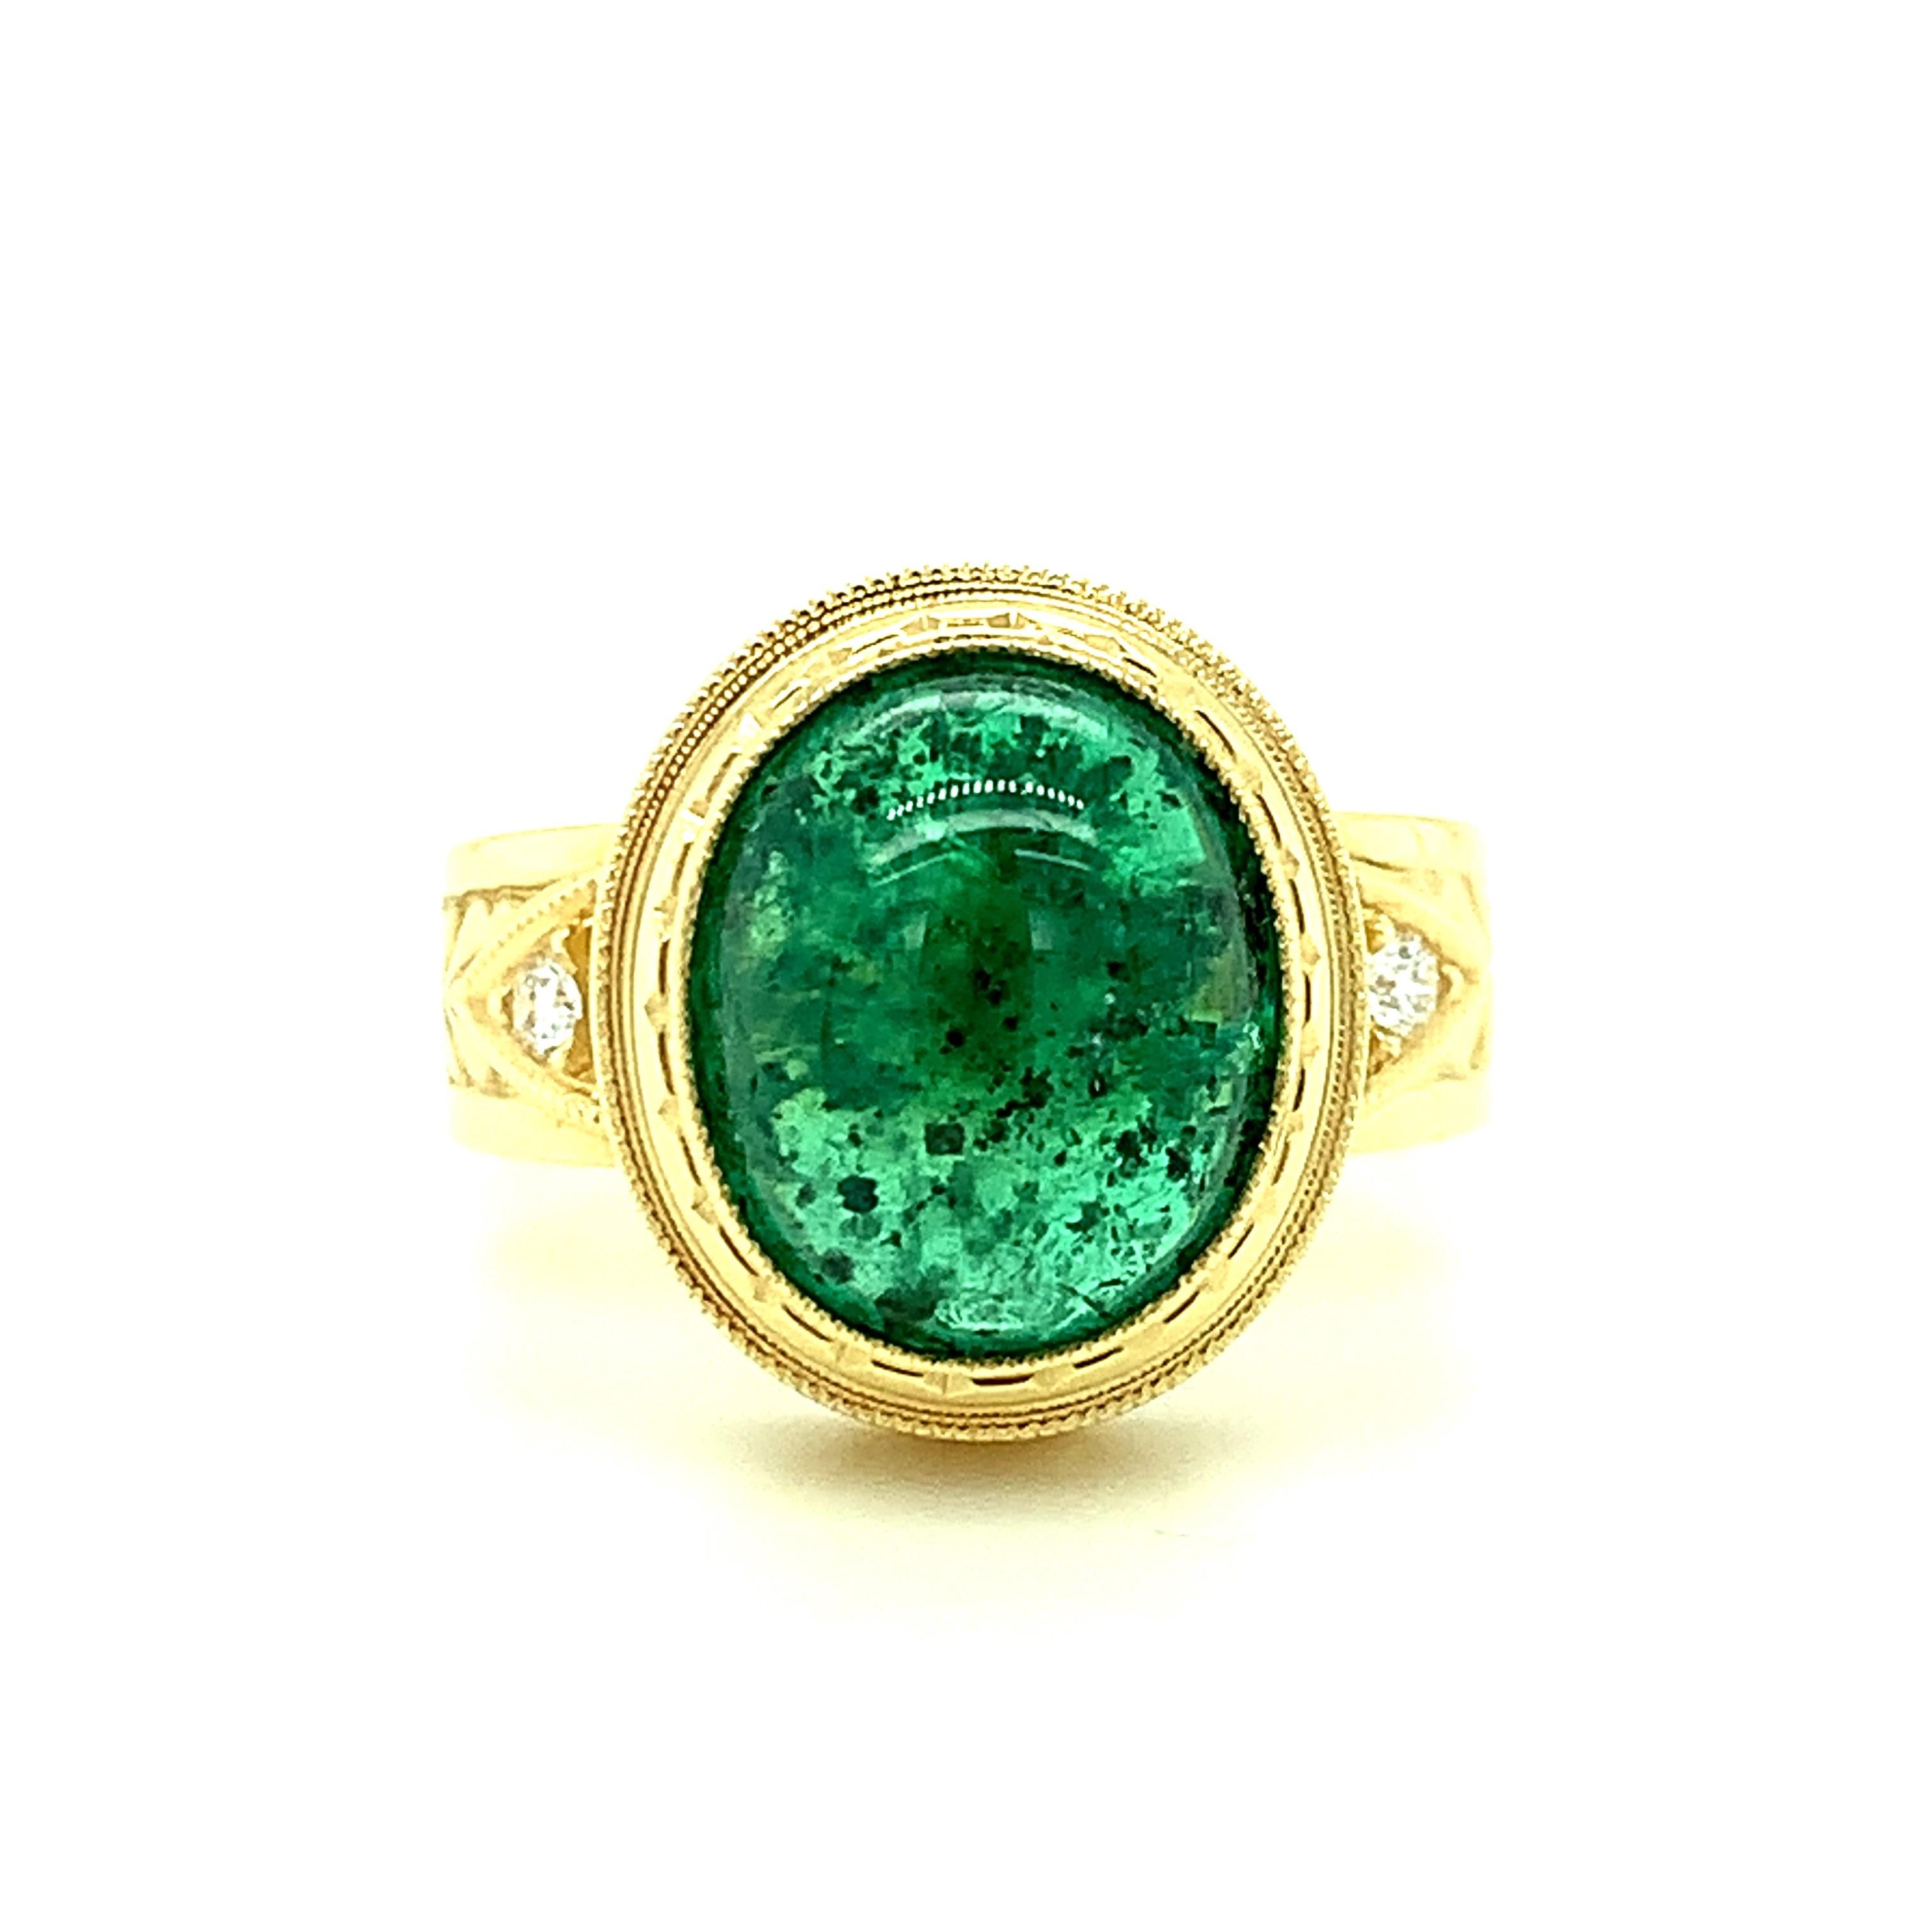 This handsome 18k yellow gold ring is set with a luscious 5.08 carat bright green emerald cabochon in one of our most popular signature designs! Custom made in 18k yellow gold to show off the ideal emerald green color of this pretty gem. The bezel